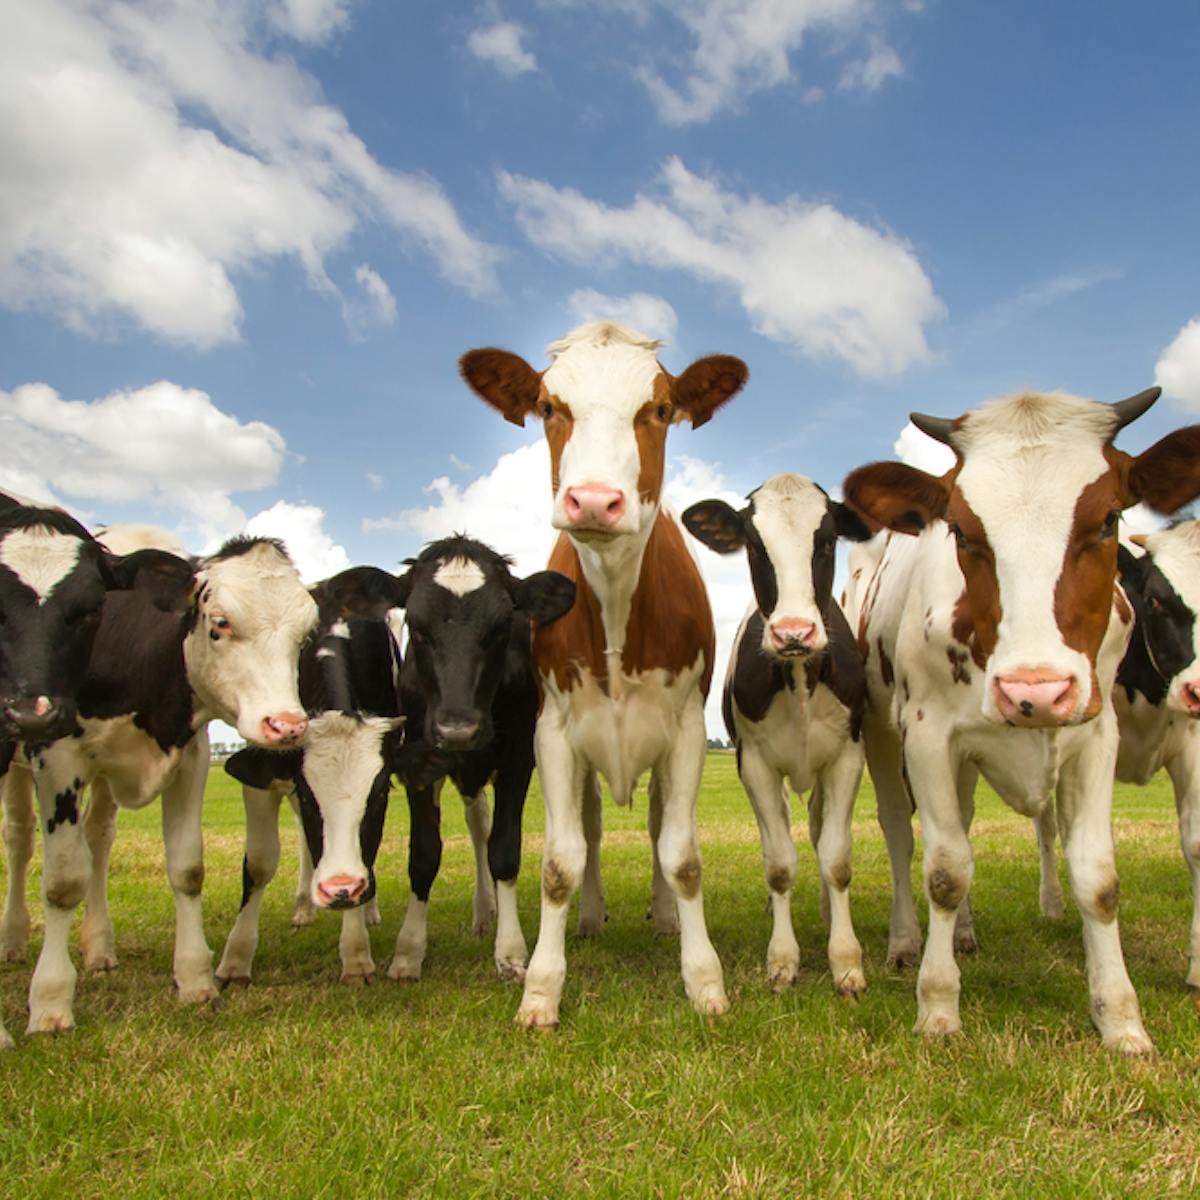 When cows attack: how dangerous are cattle and how can you stay safe around  them?